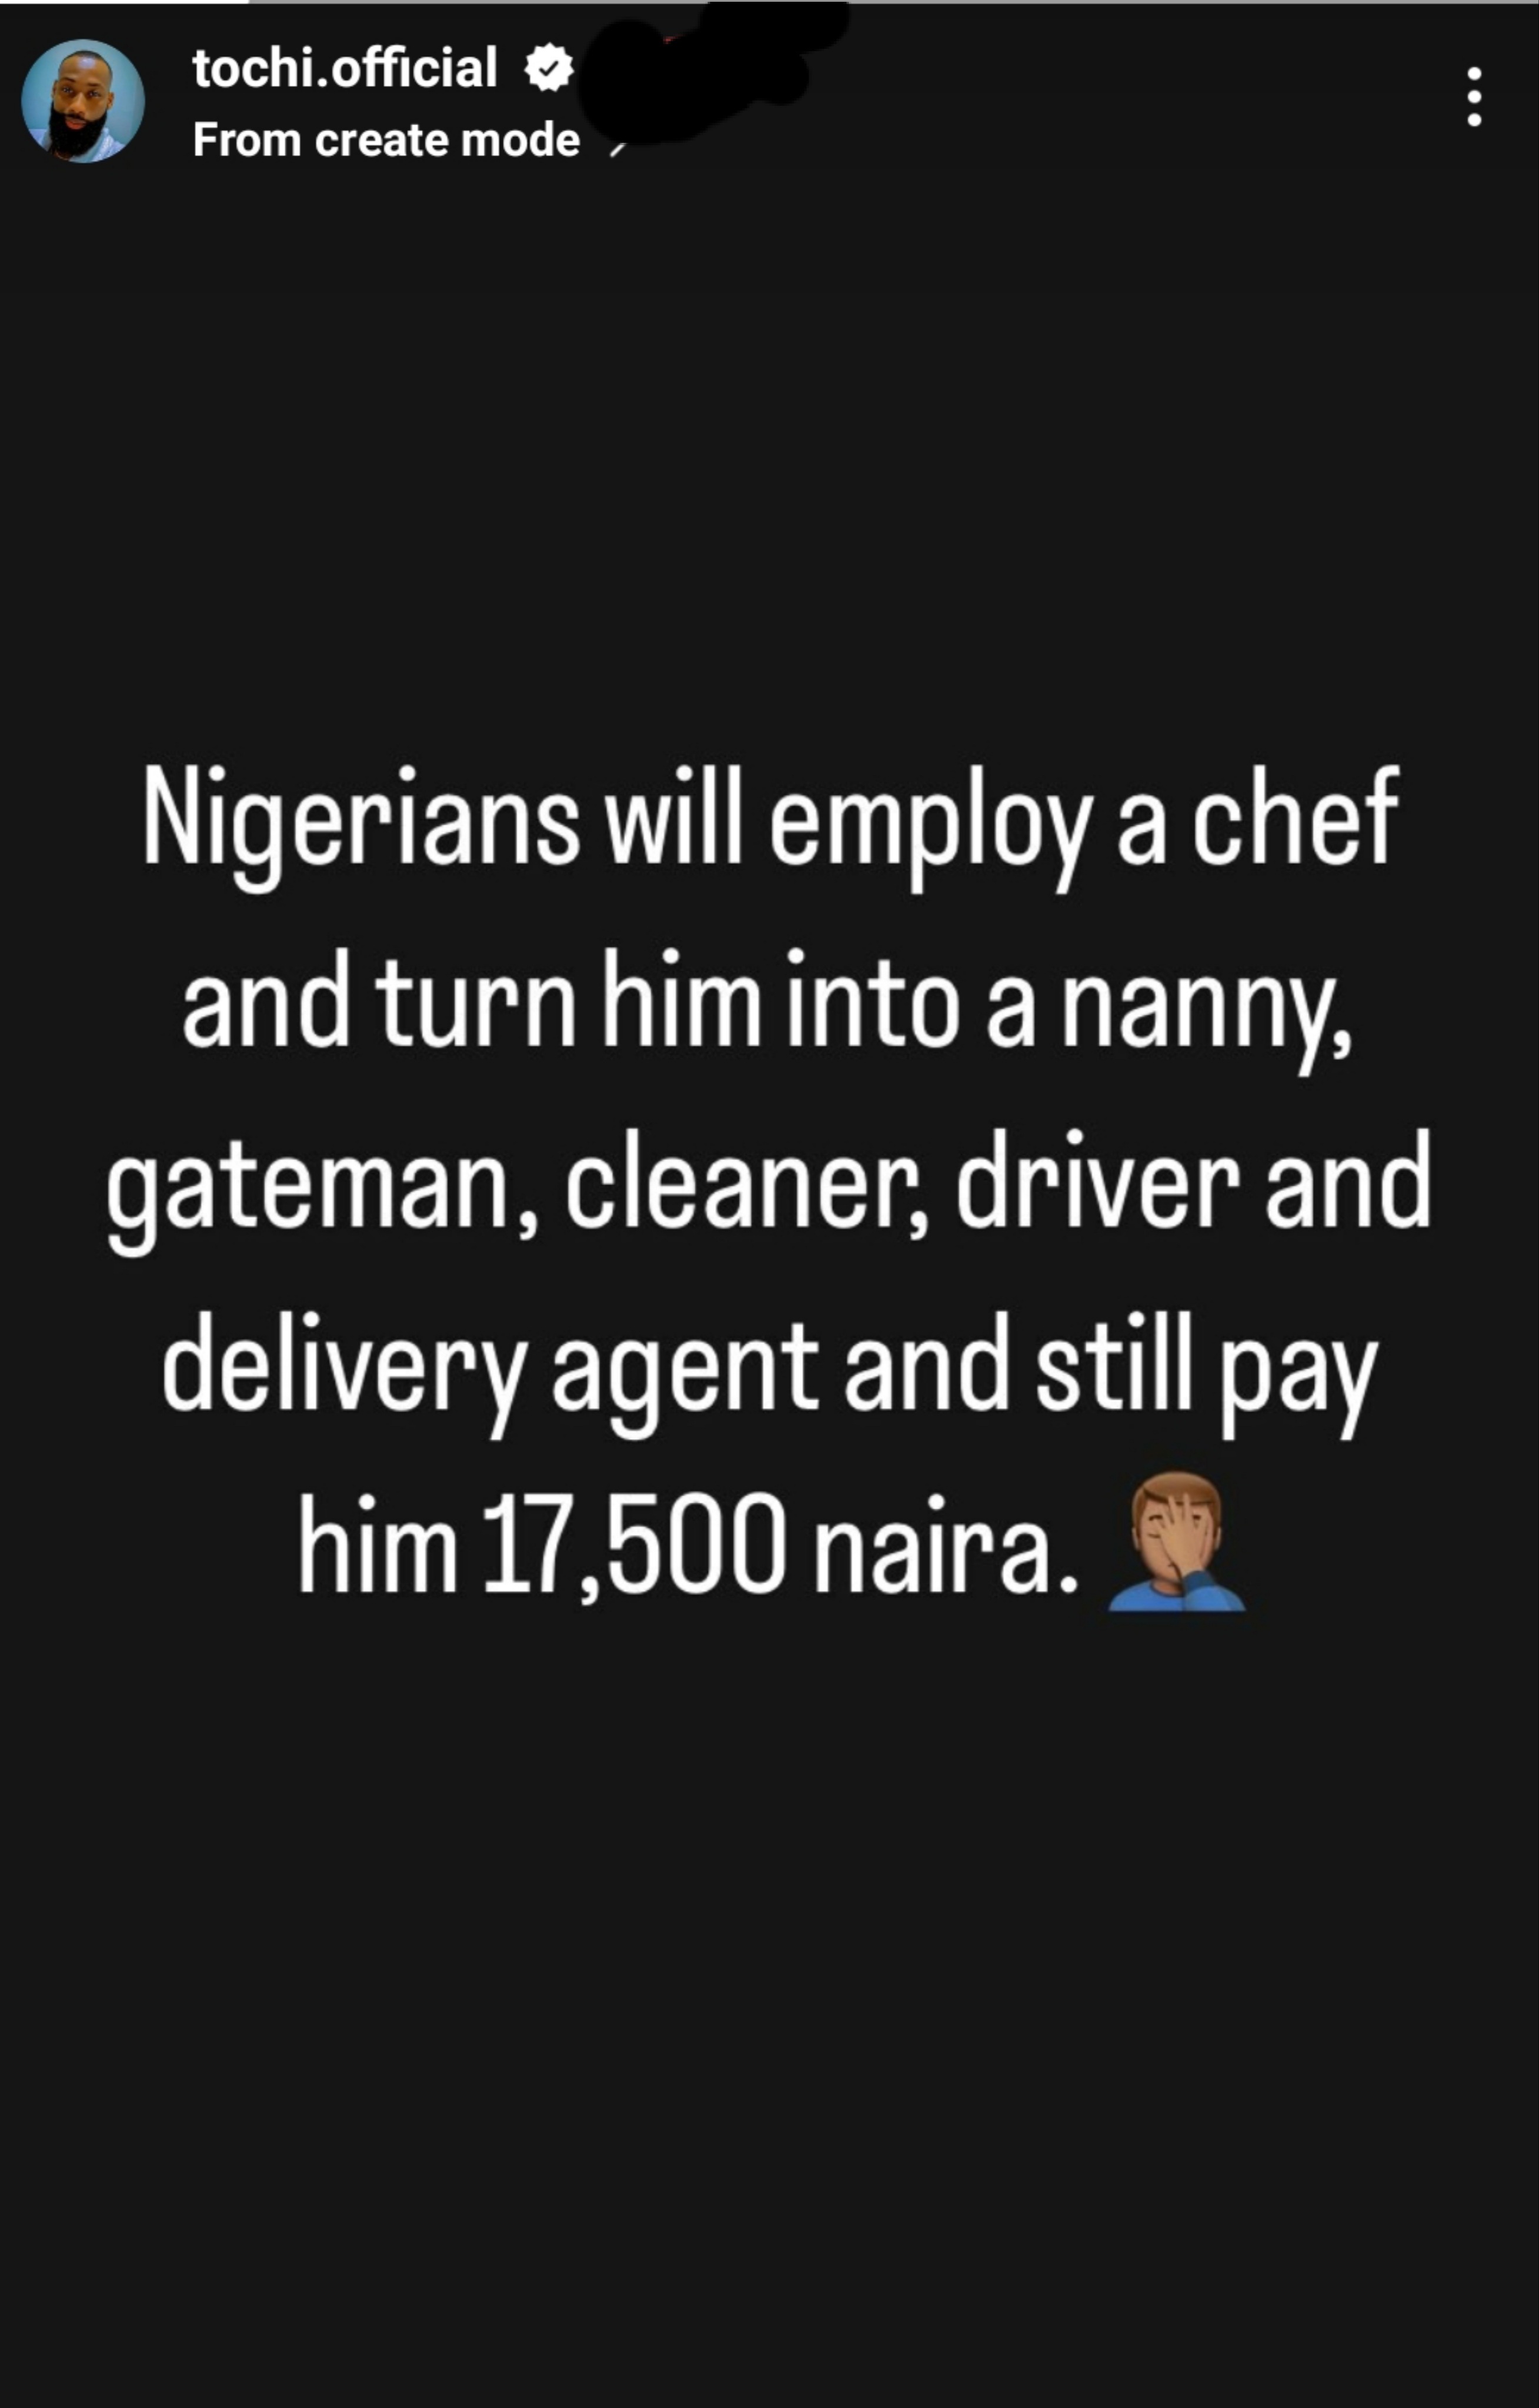 A Chef will be employed by Nigerians and forced to become a nanny, gateman and others while being paid N17,500 - BBNaija’s Tochi